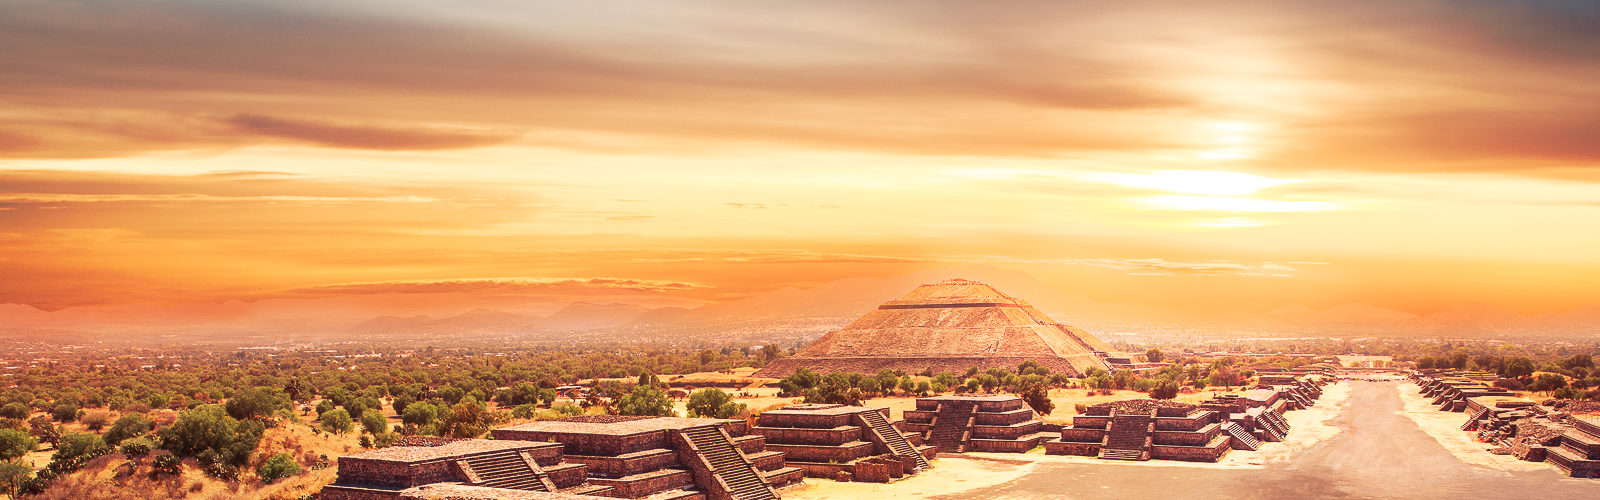 Teotihuacan, Mexico, Pyramid of the sun